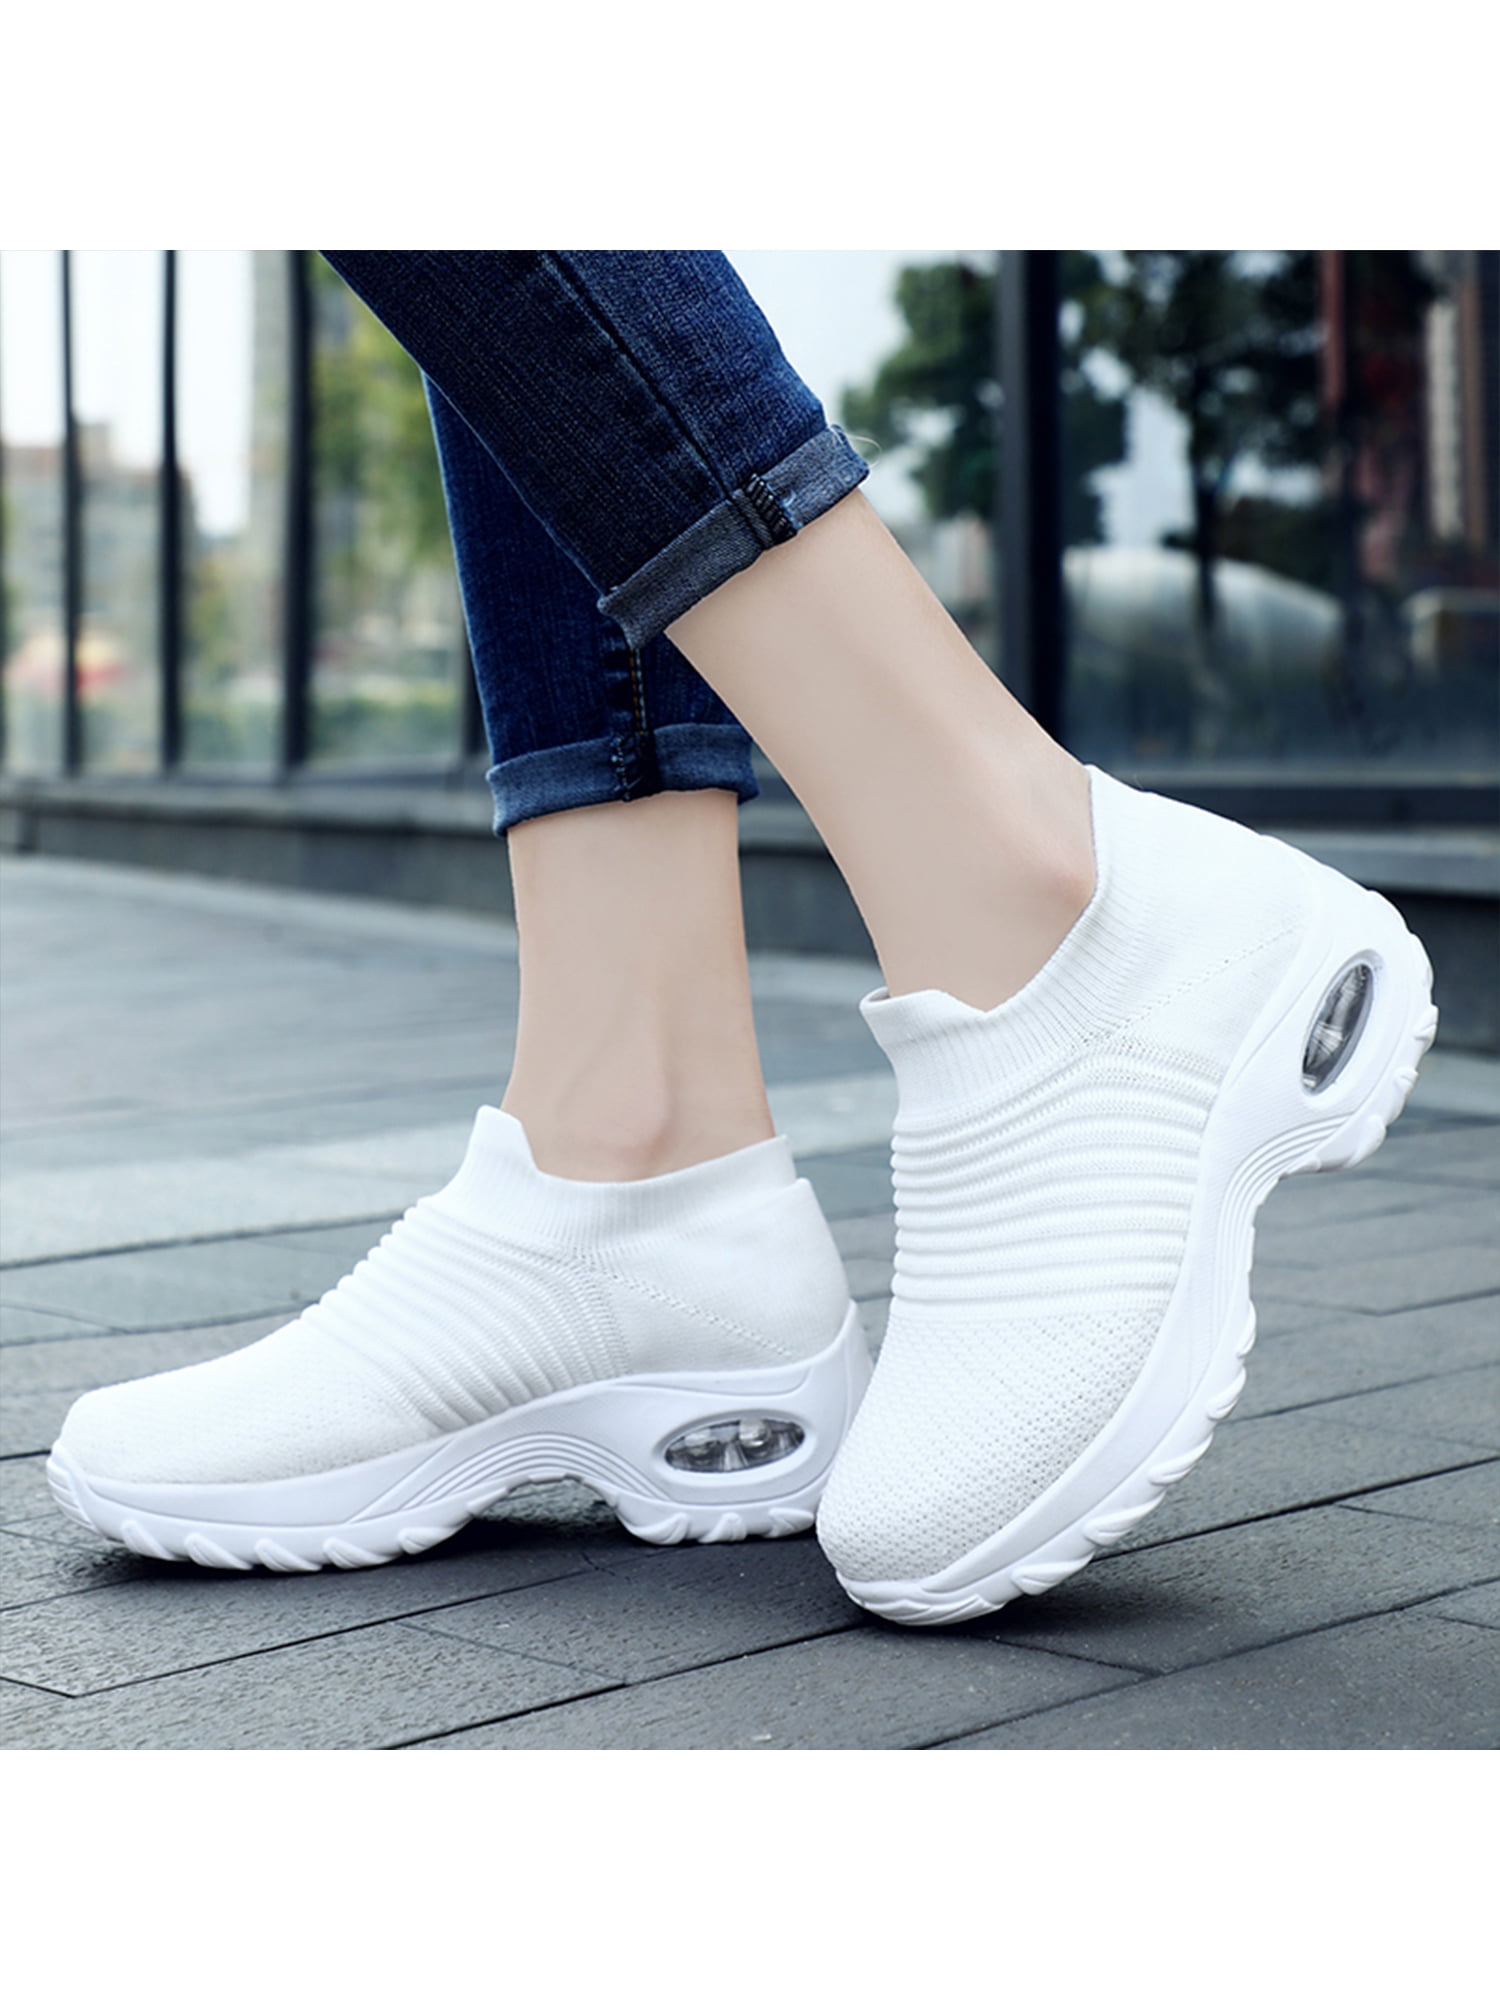 Women Platform Sneakers Slip On Trainers Comfy Plaid Loafers Walking Sport Shoes 